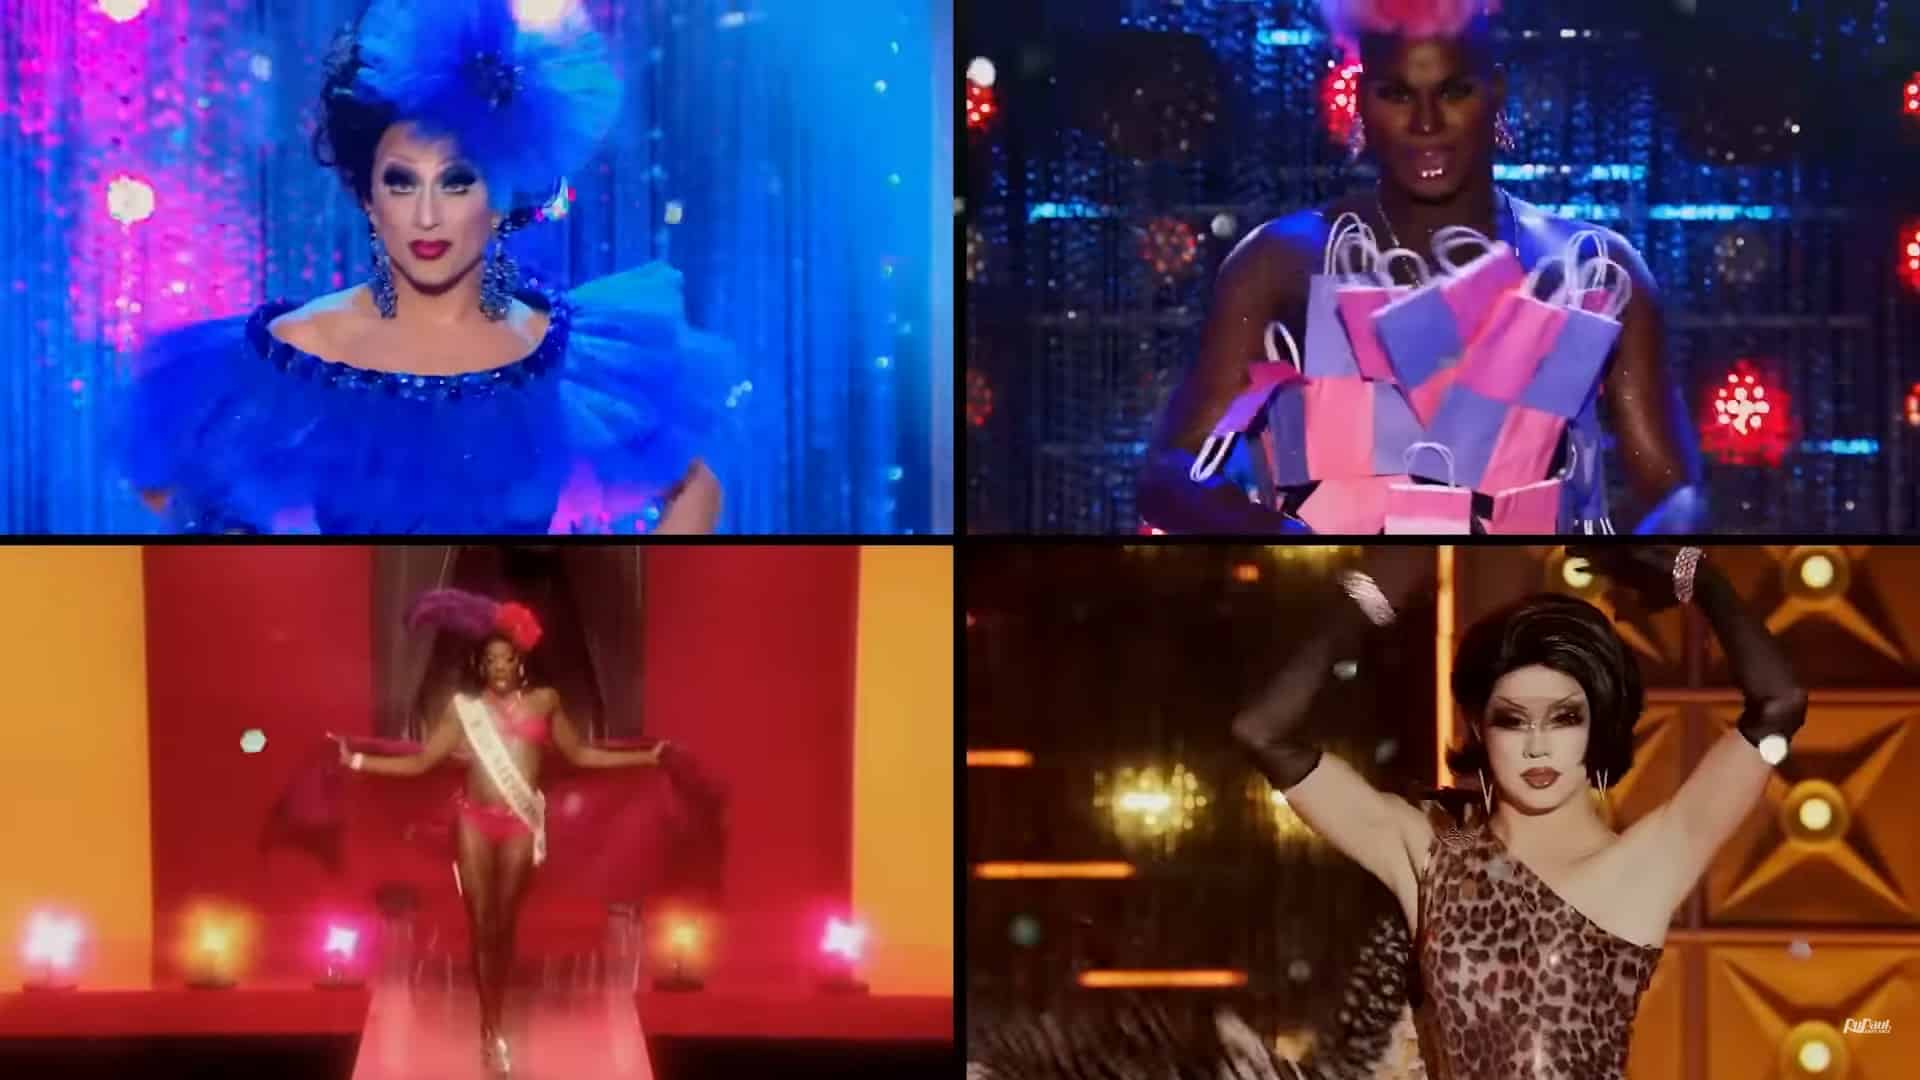 Queens of the show